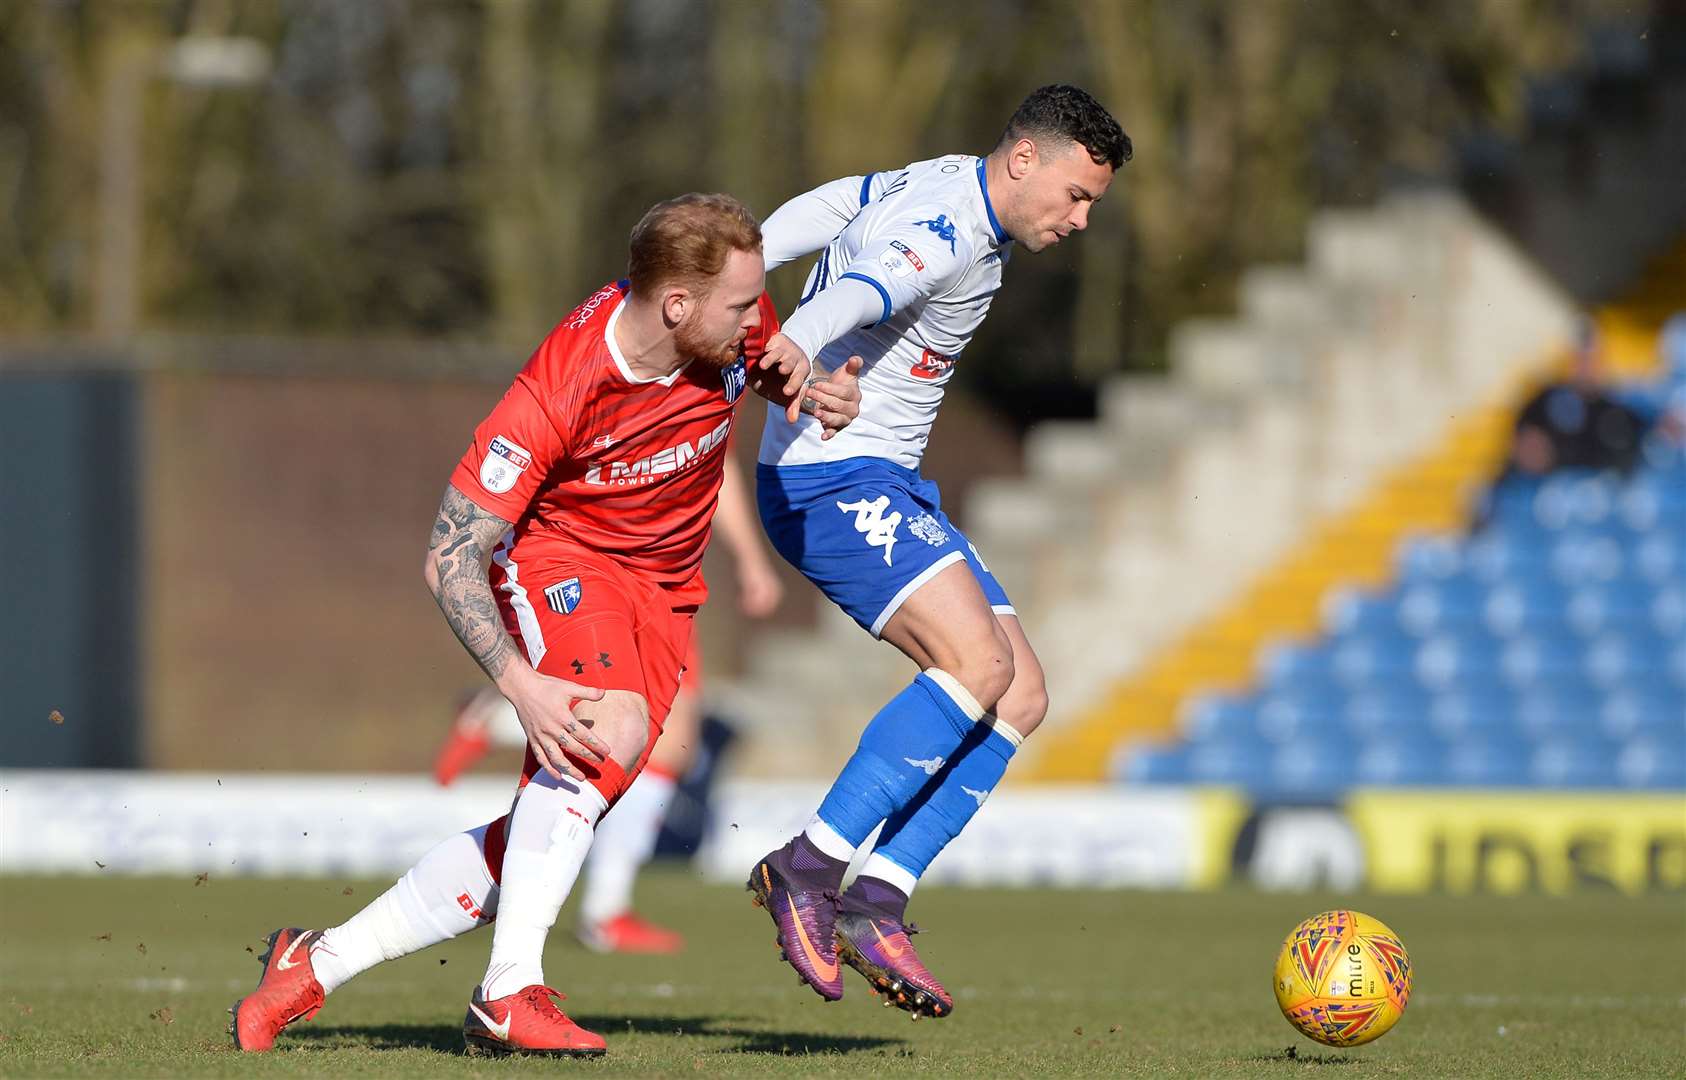 Gillingham’s Connor Ogilvie challenges with Bury's Zeli Ismail during their League 1 game at Gigg Lane last year Picture: Ady Kerry